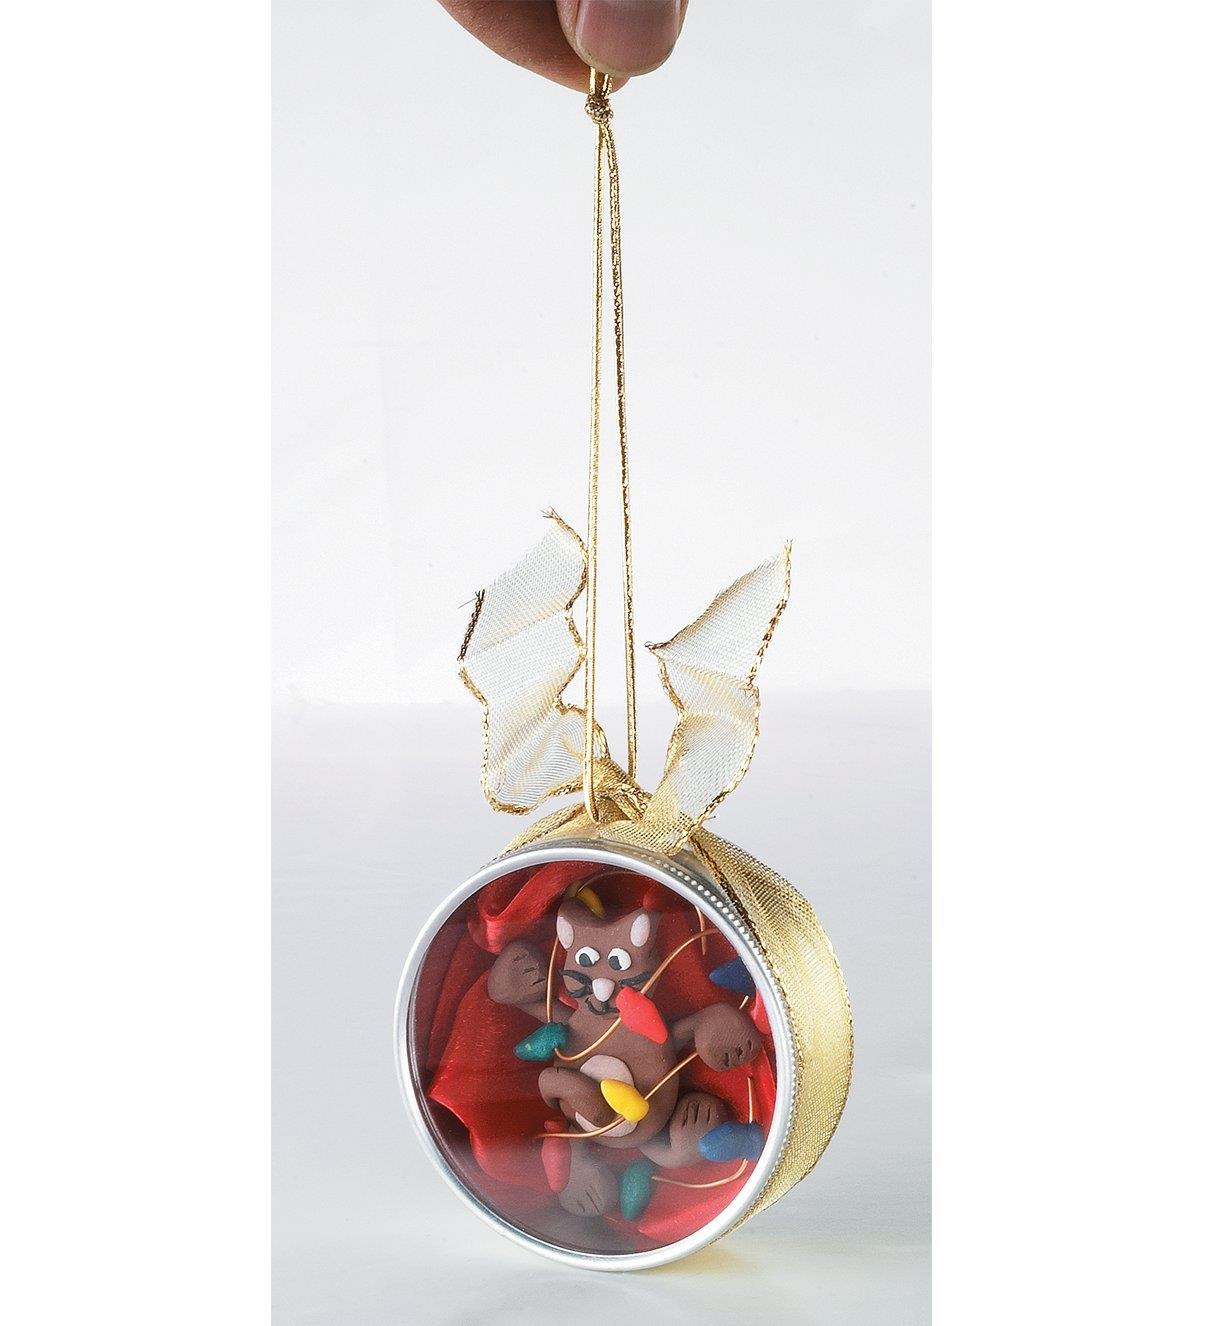 A holiday ornament made with a polymer clay cat inside a Watchmaker's Case